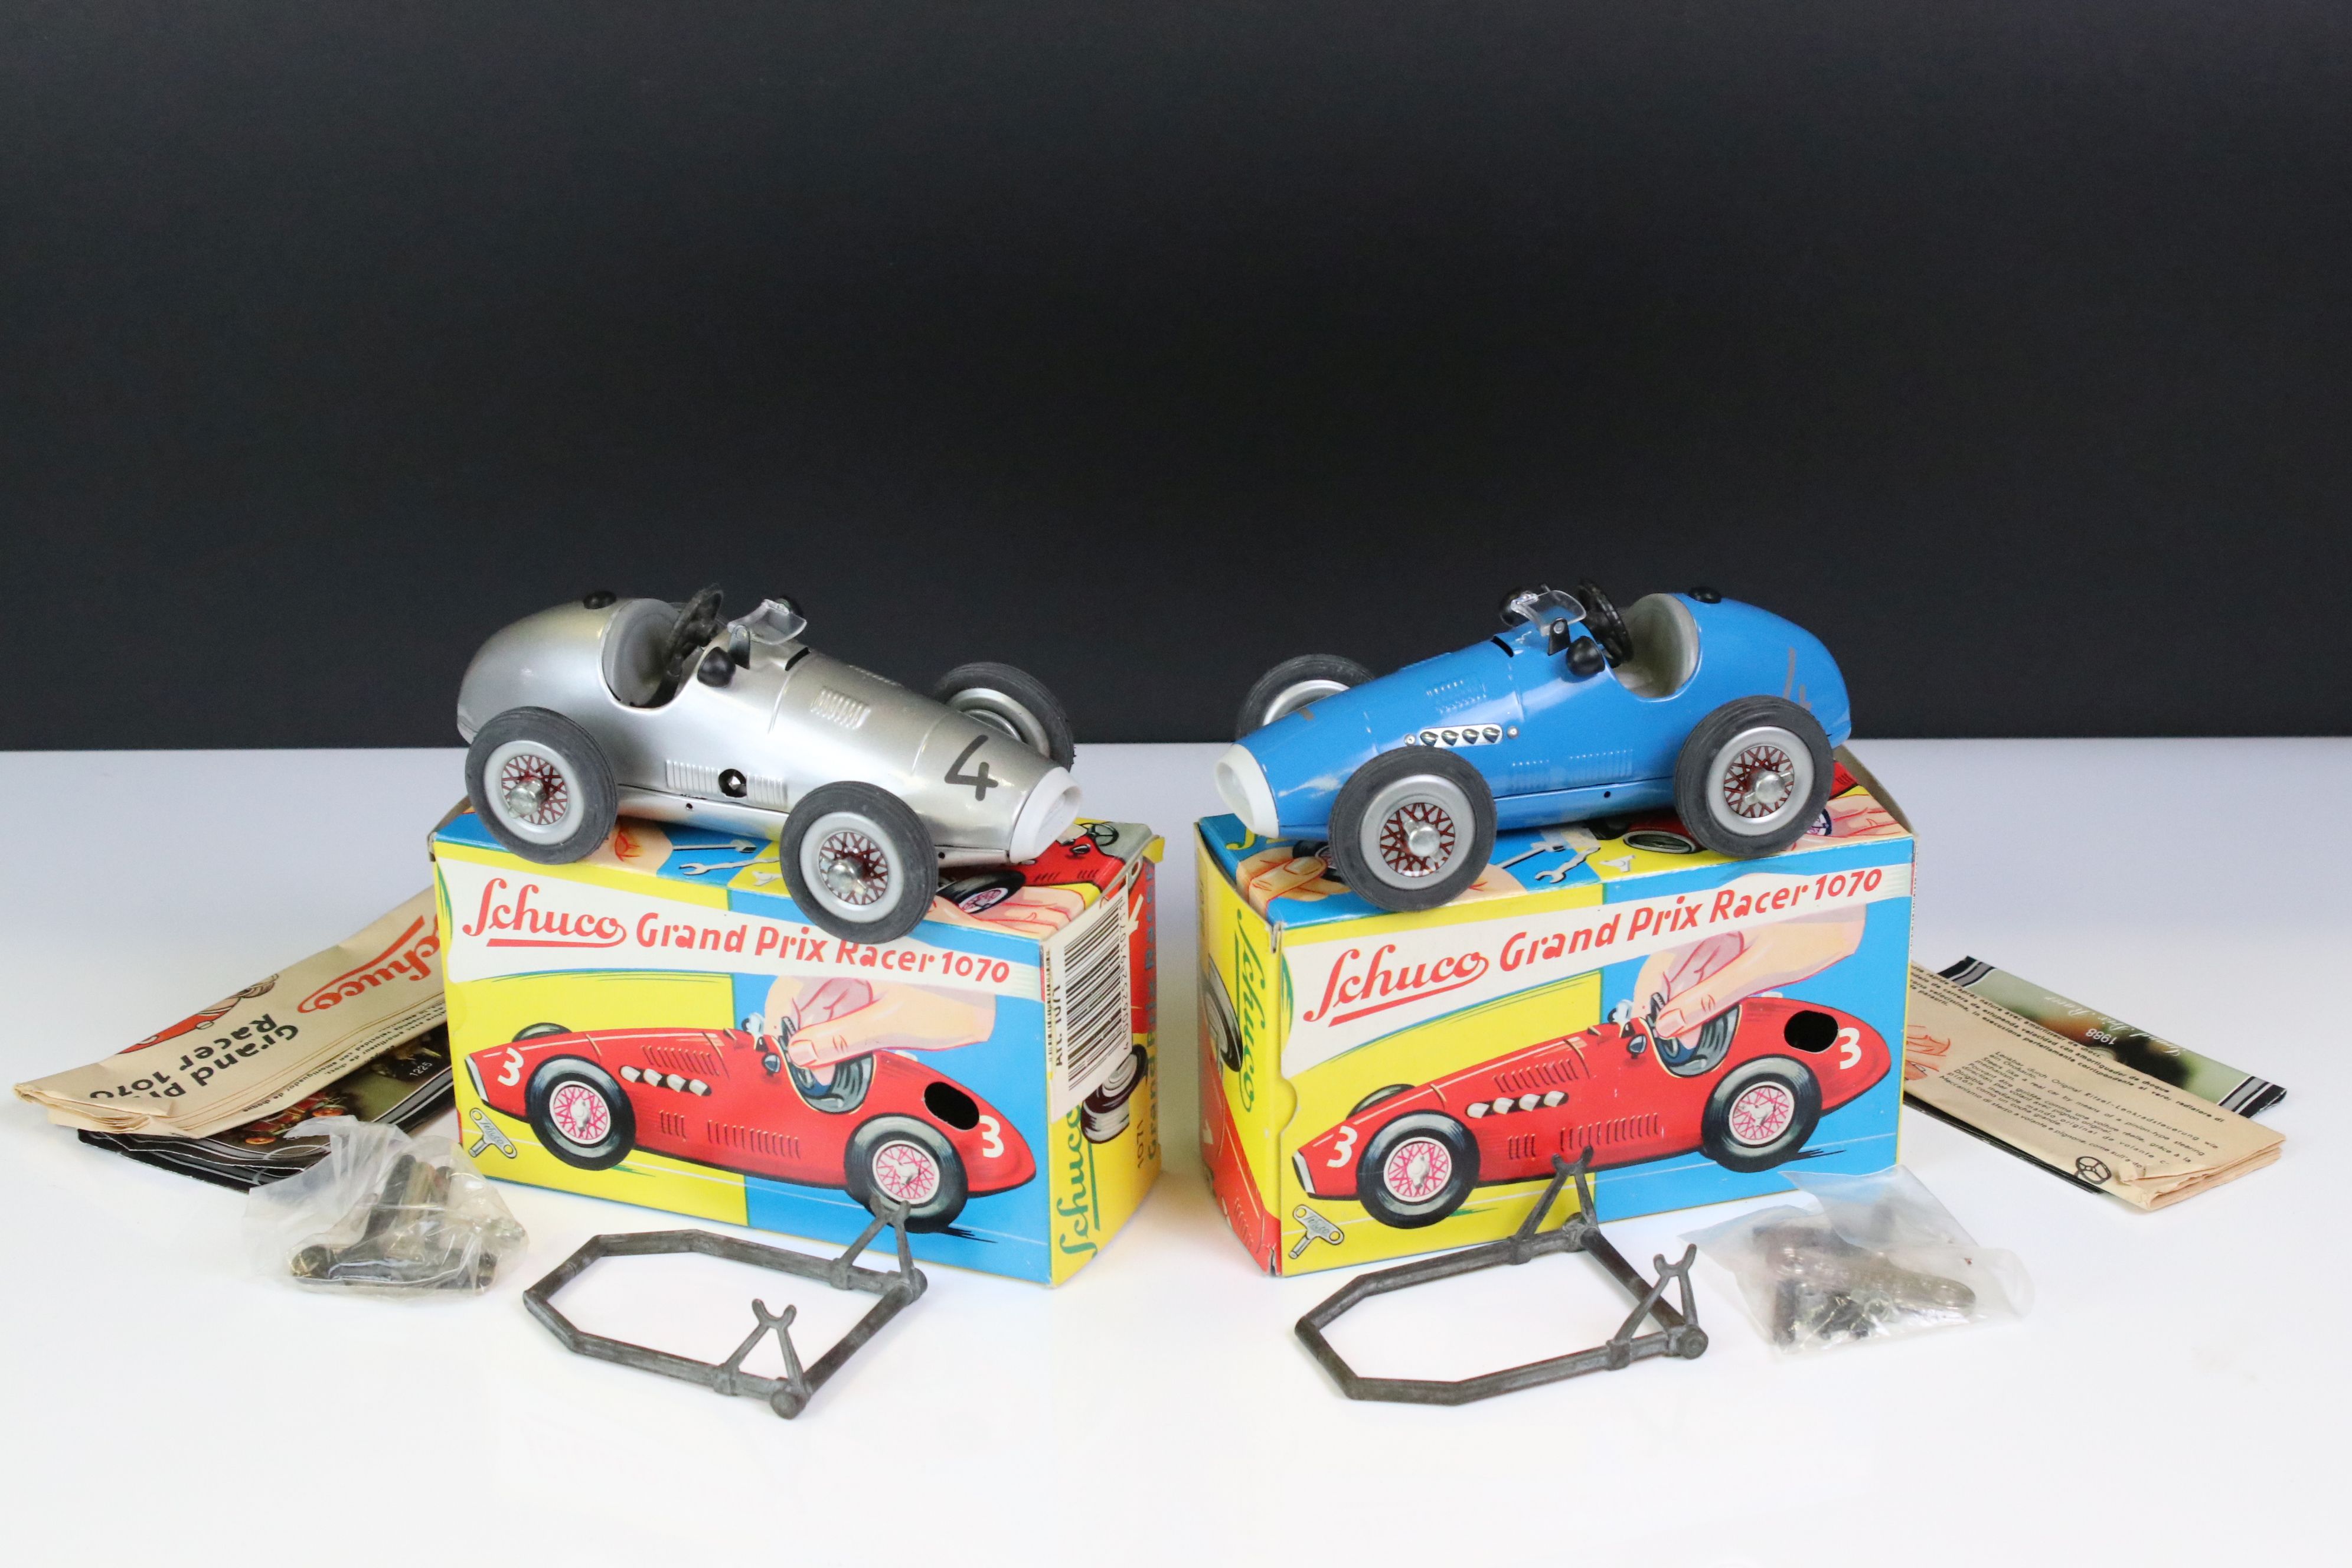 Two boxed Schuco Grand Prix Racer clockwork tin plate models to include 1071 in silver and 1070 in